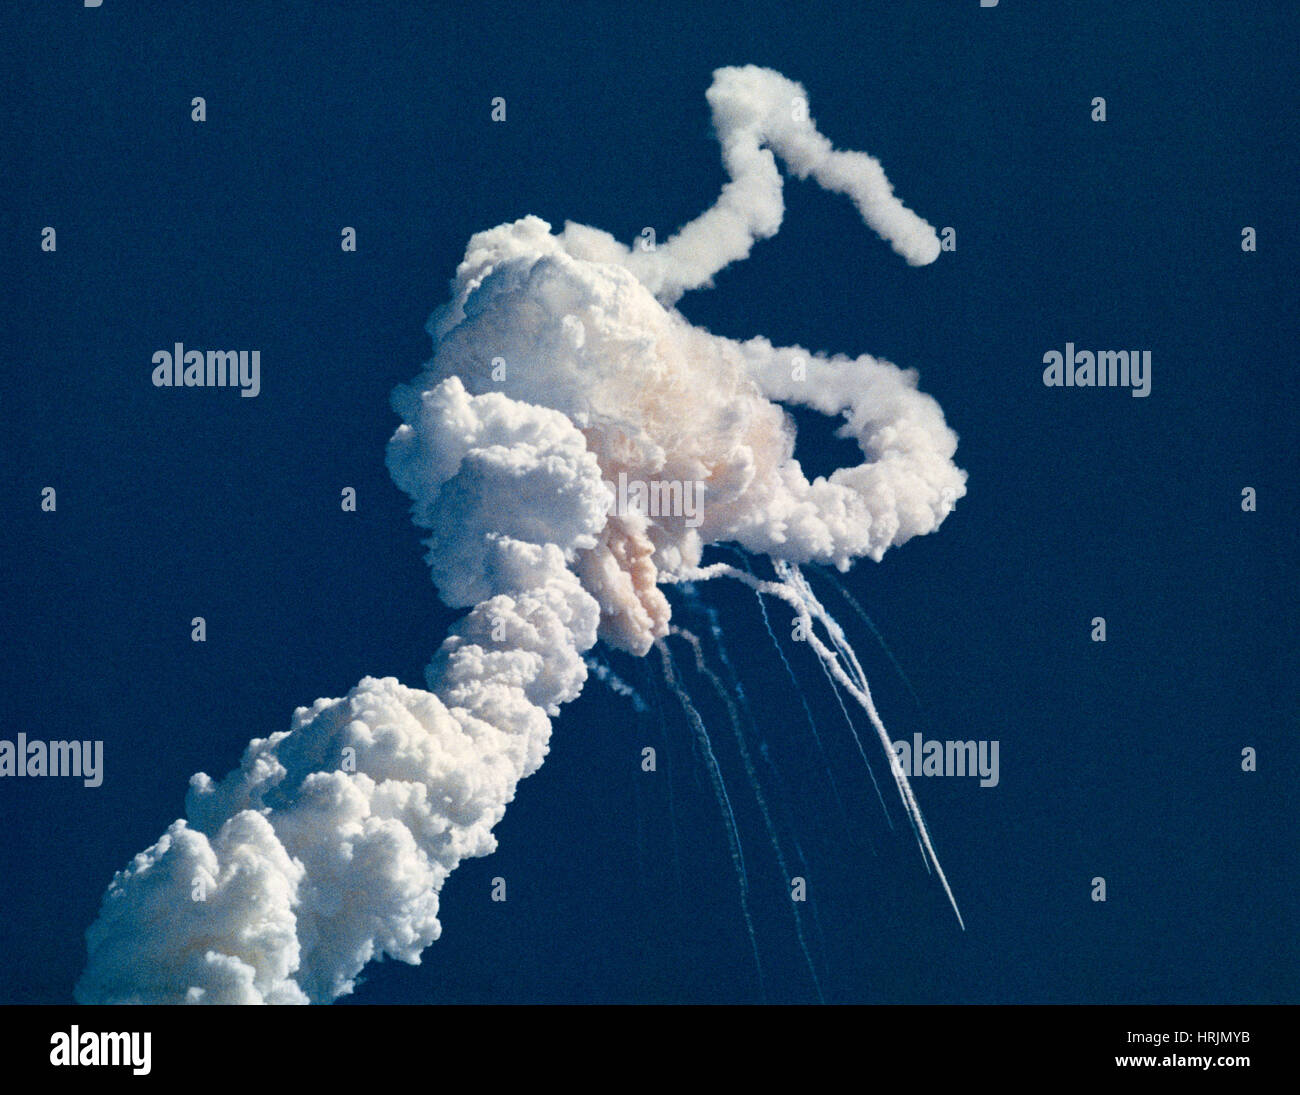 Space Shuttle Challenger Disaster, 1986 Stock Photo